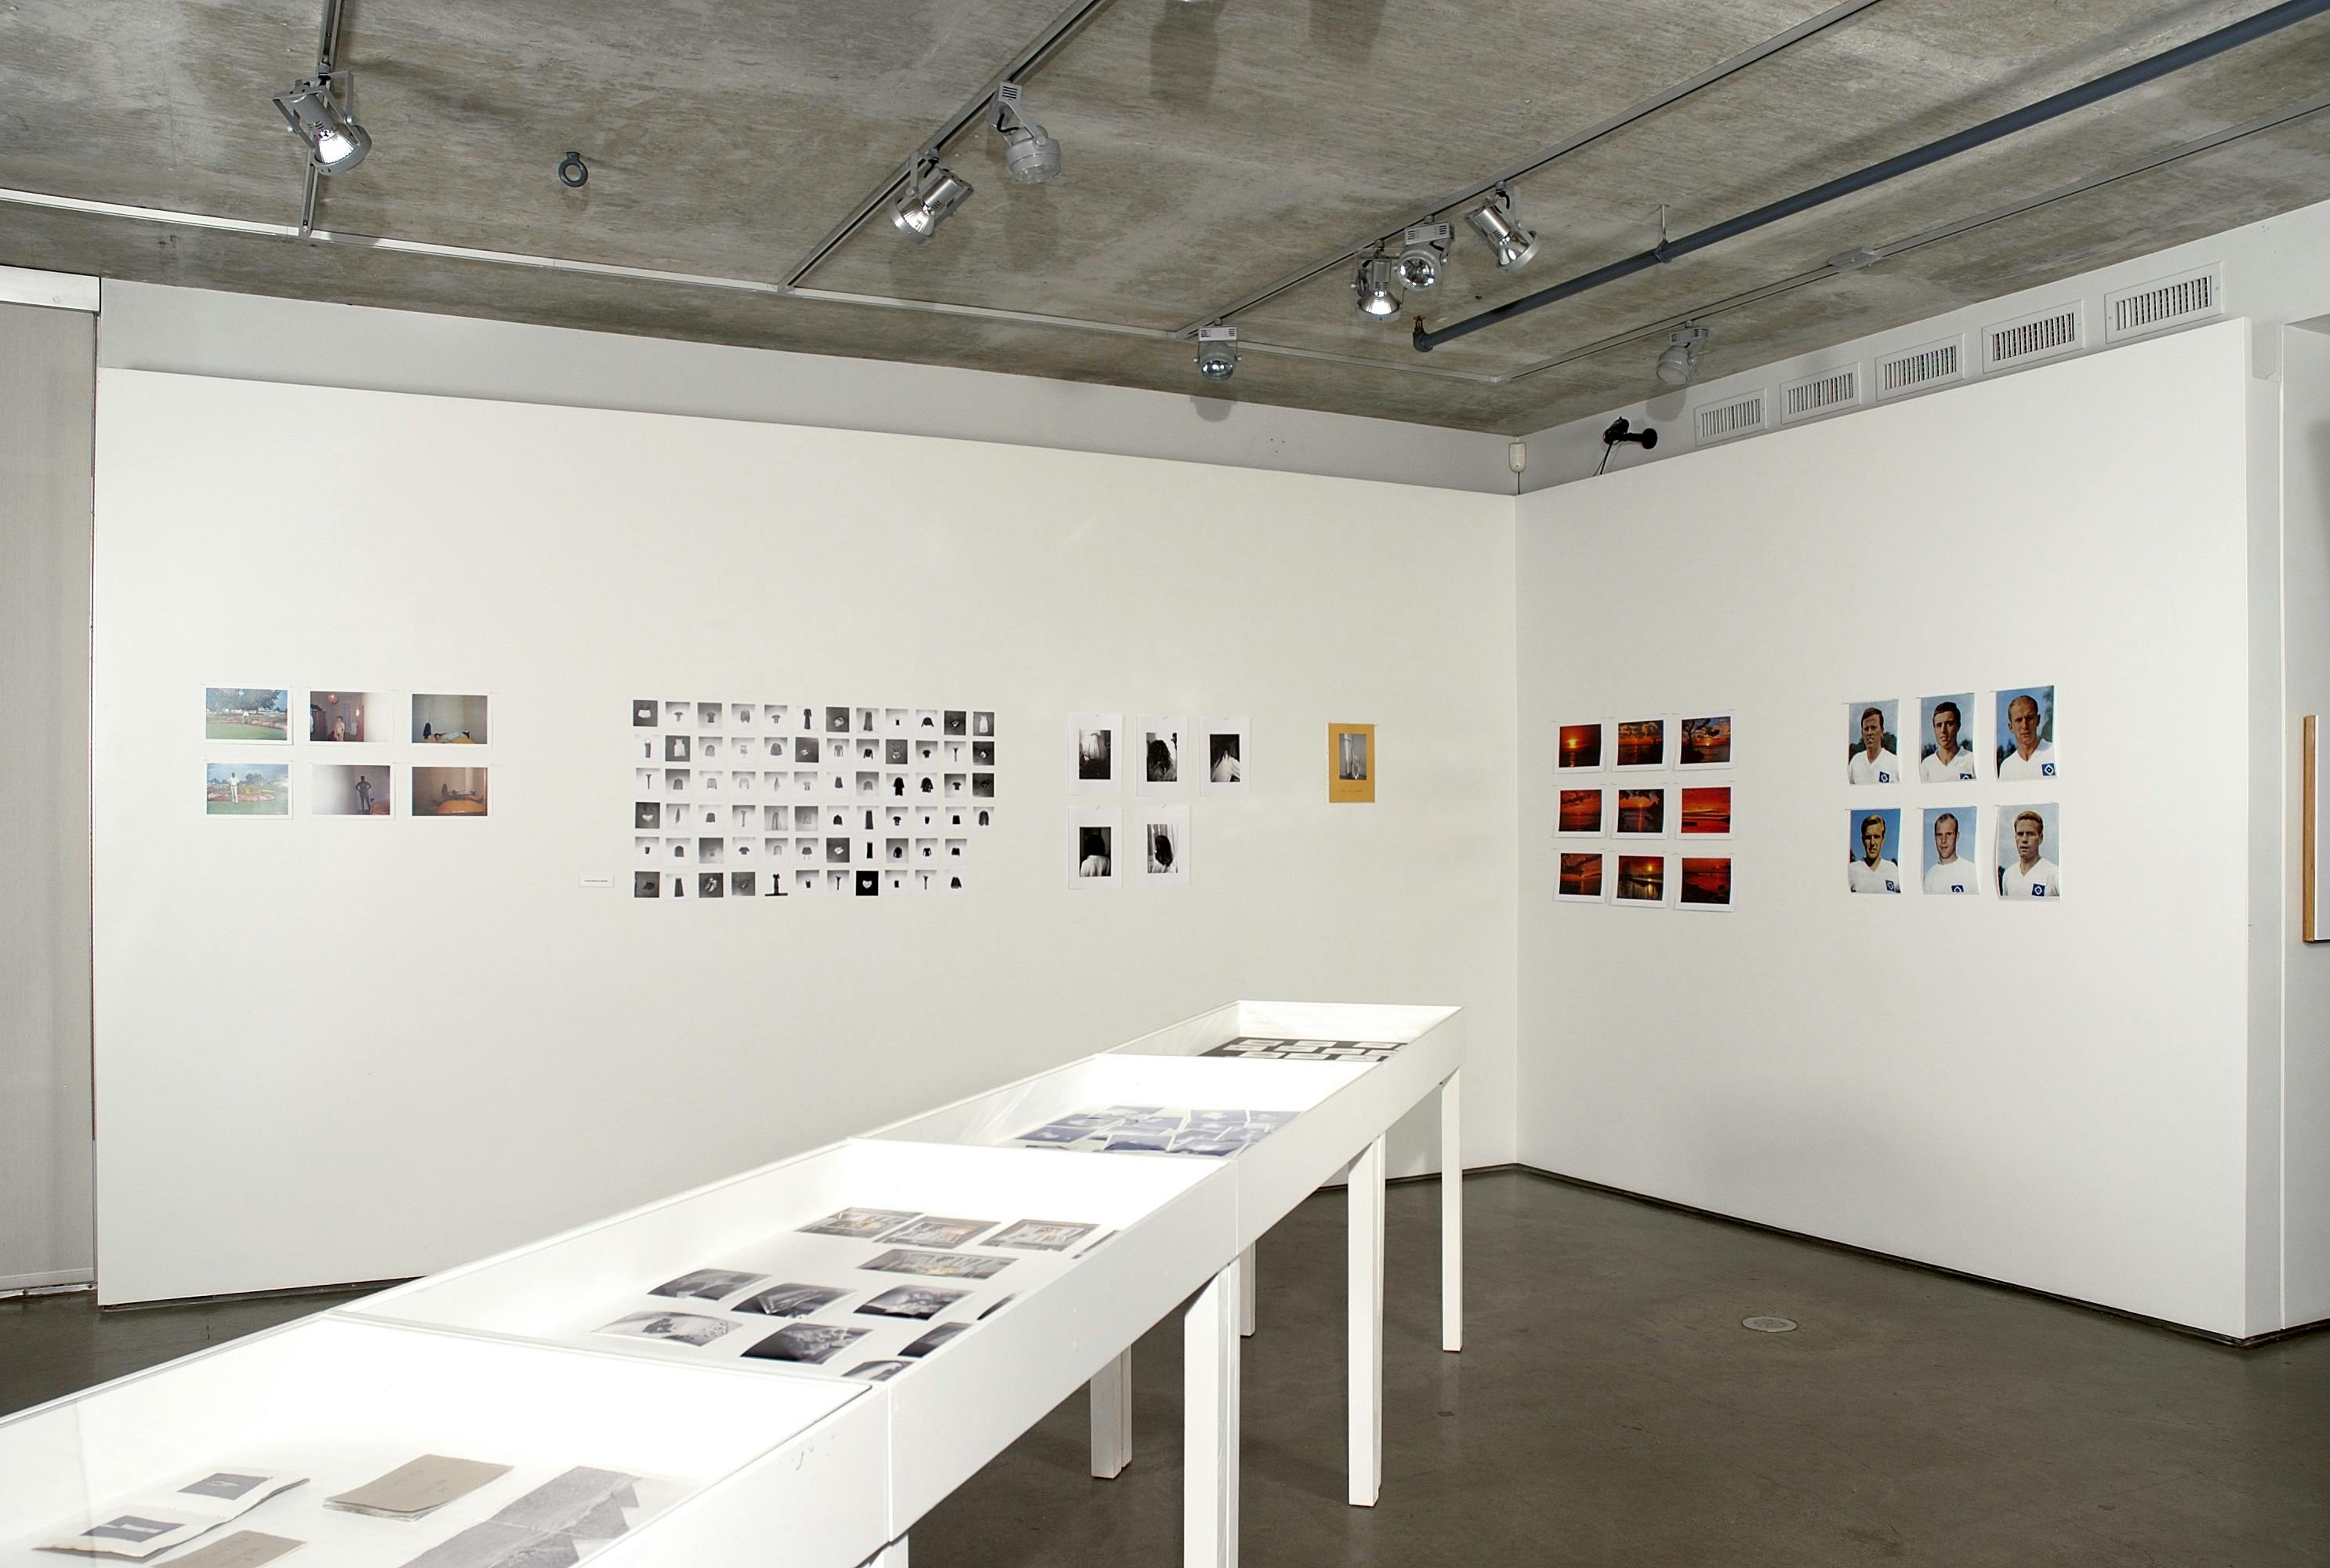 The corner of a gallery, showing dozens of small photos on the walls, divided into three sets. In the space, three long, white vitrine tables are placed together perpendicular to the walls.